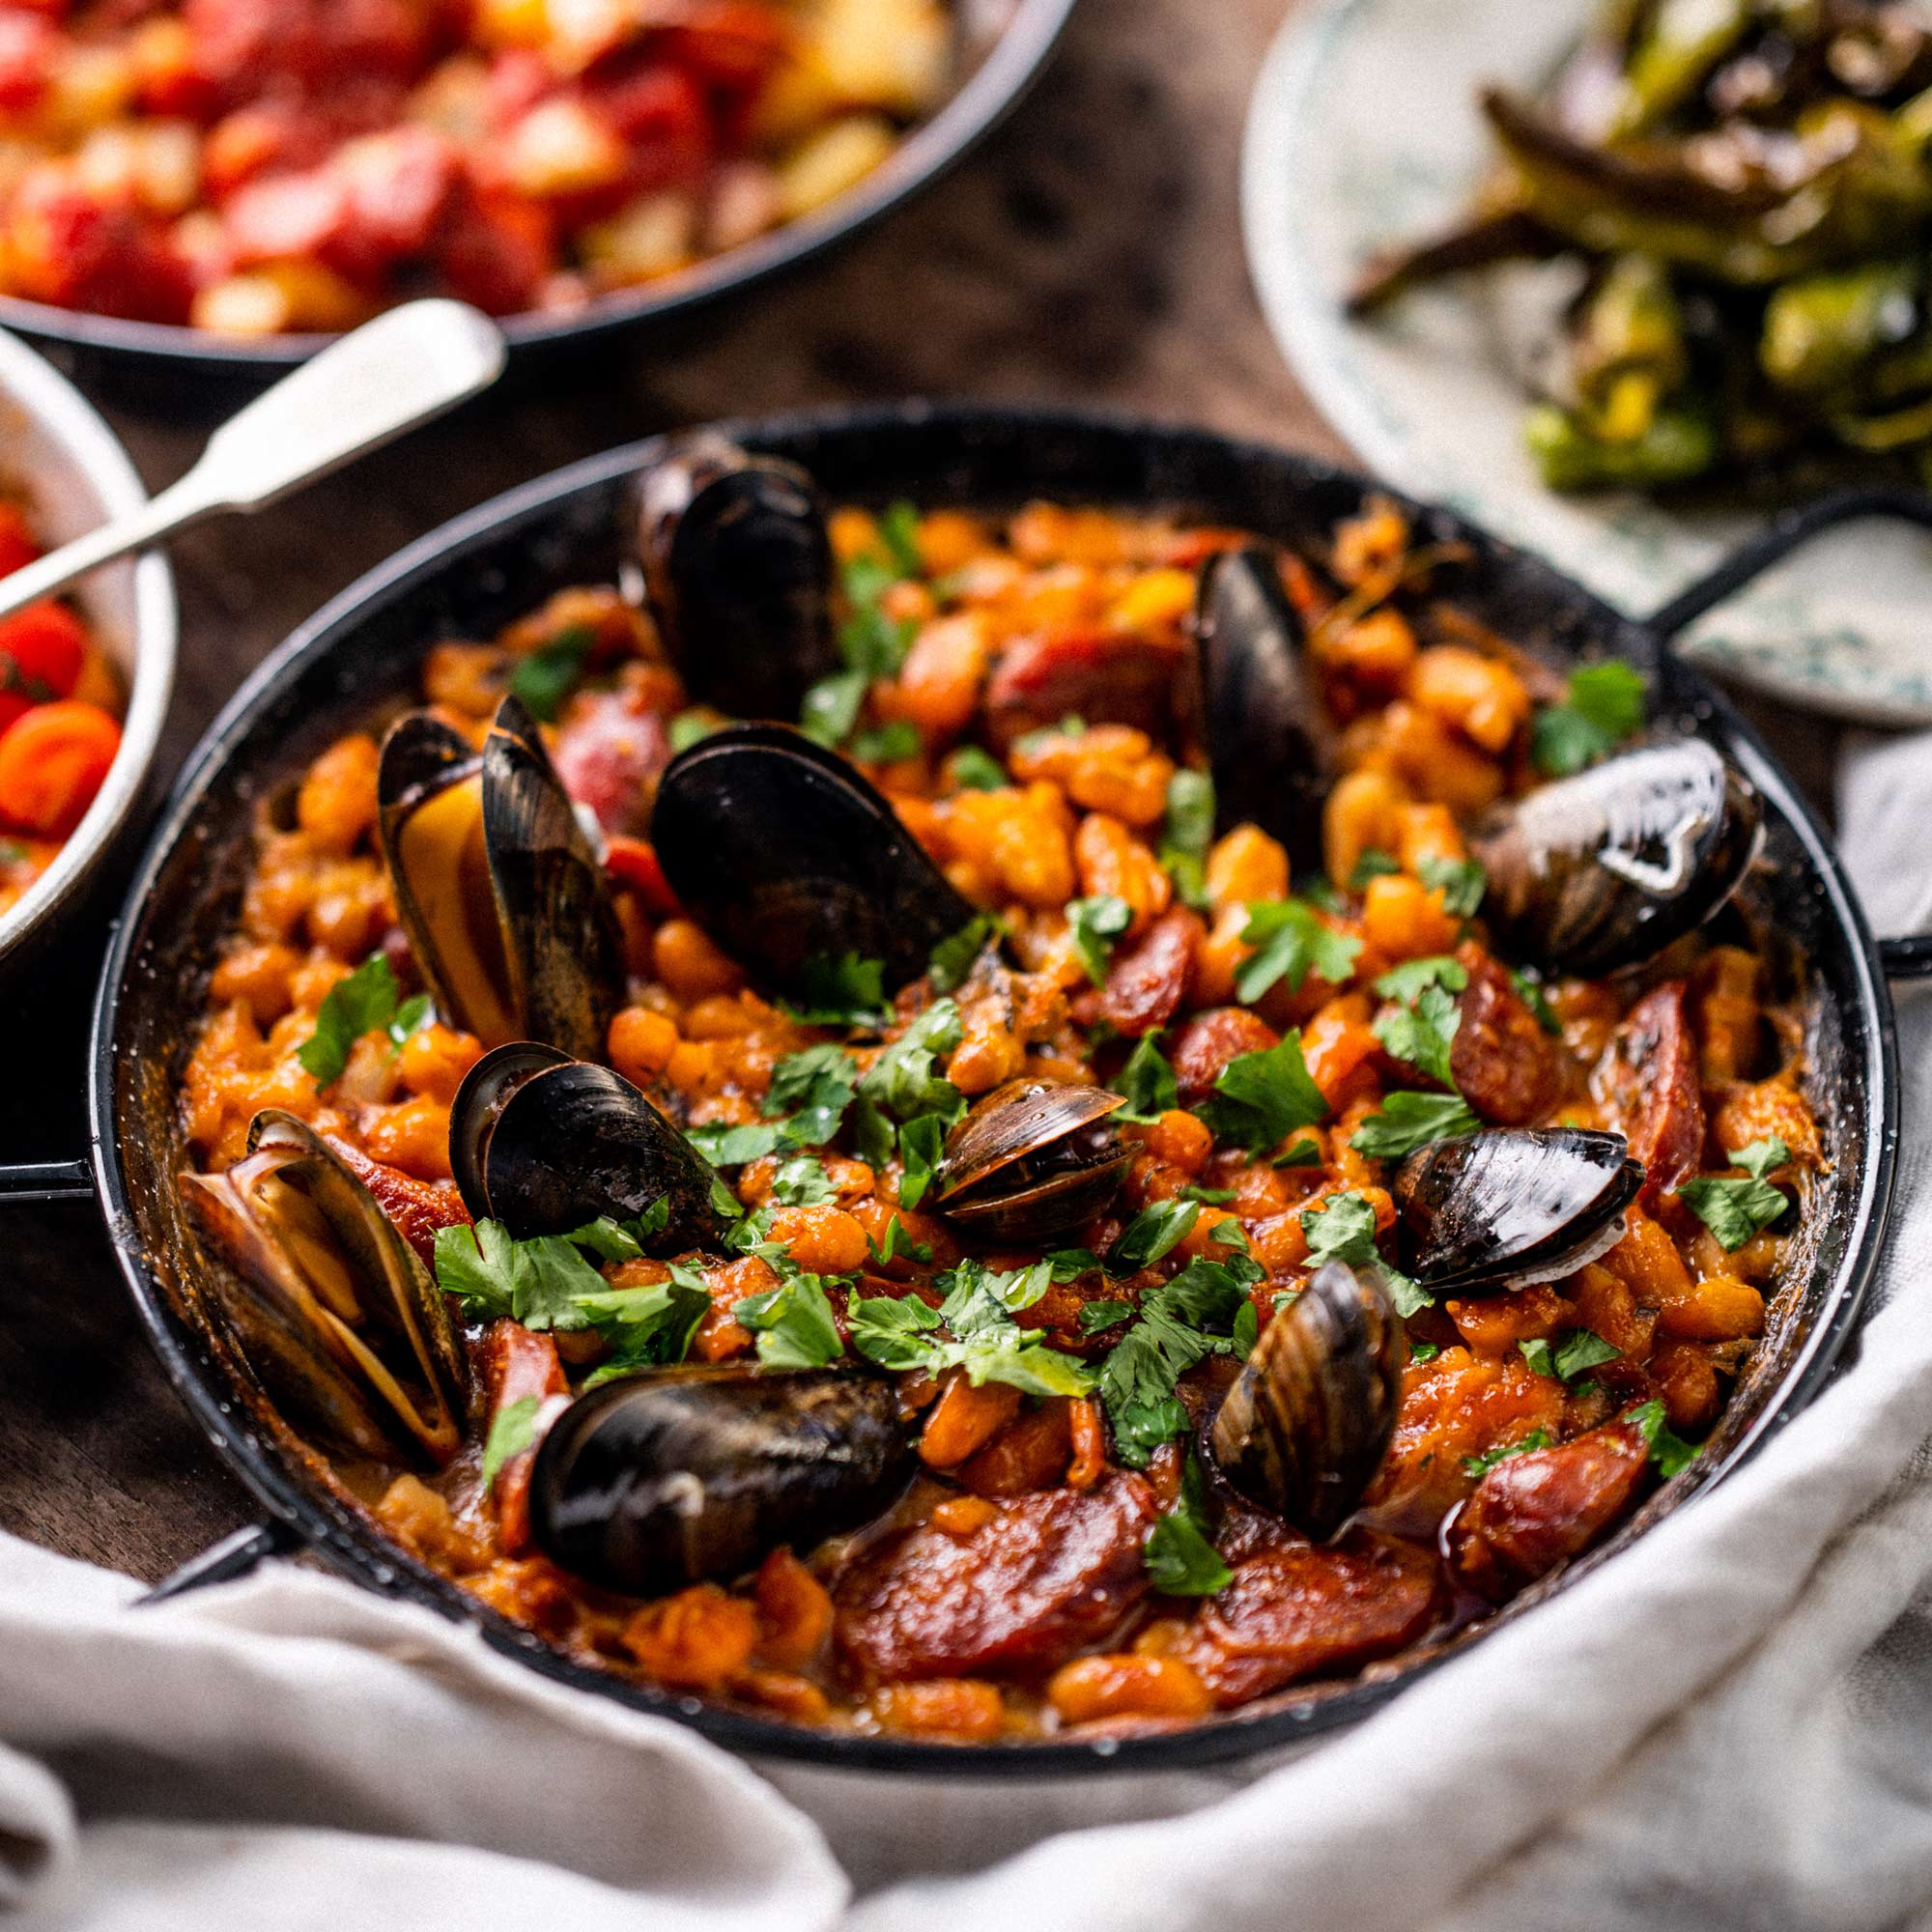 Baked chorizo, mussels and butter beans